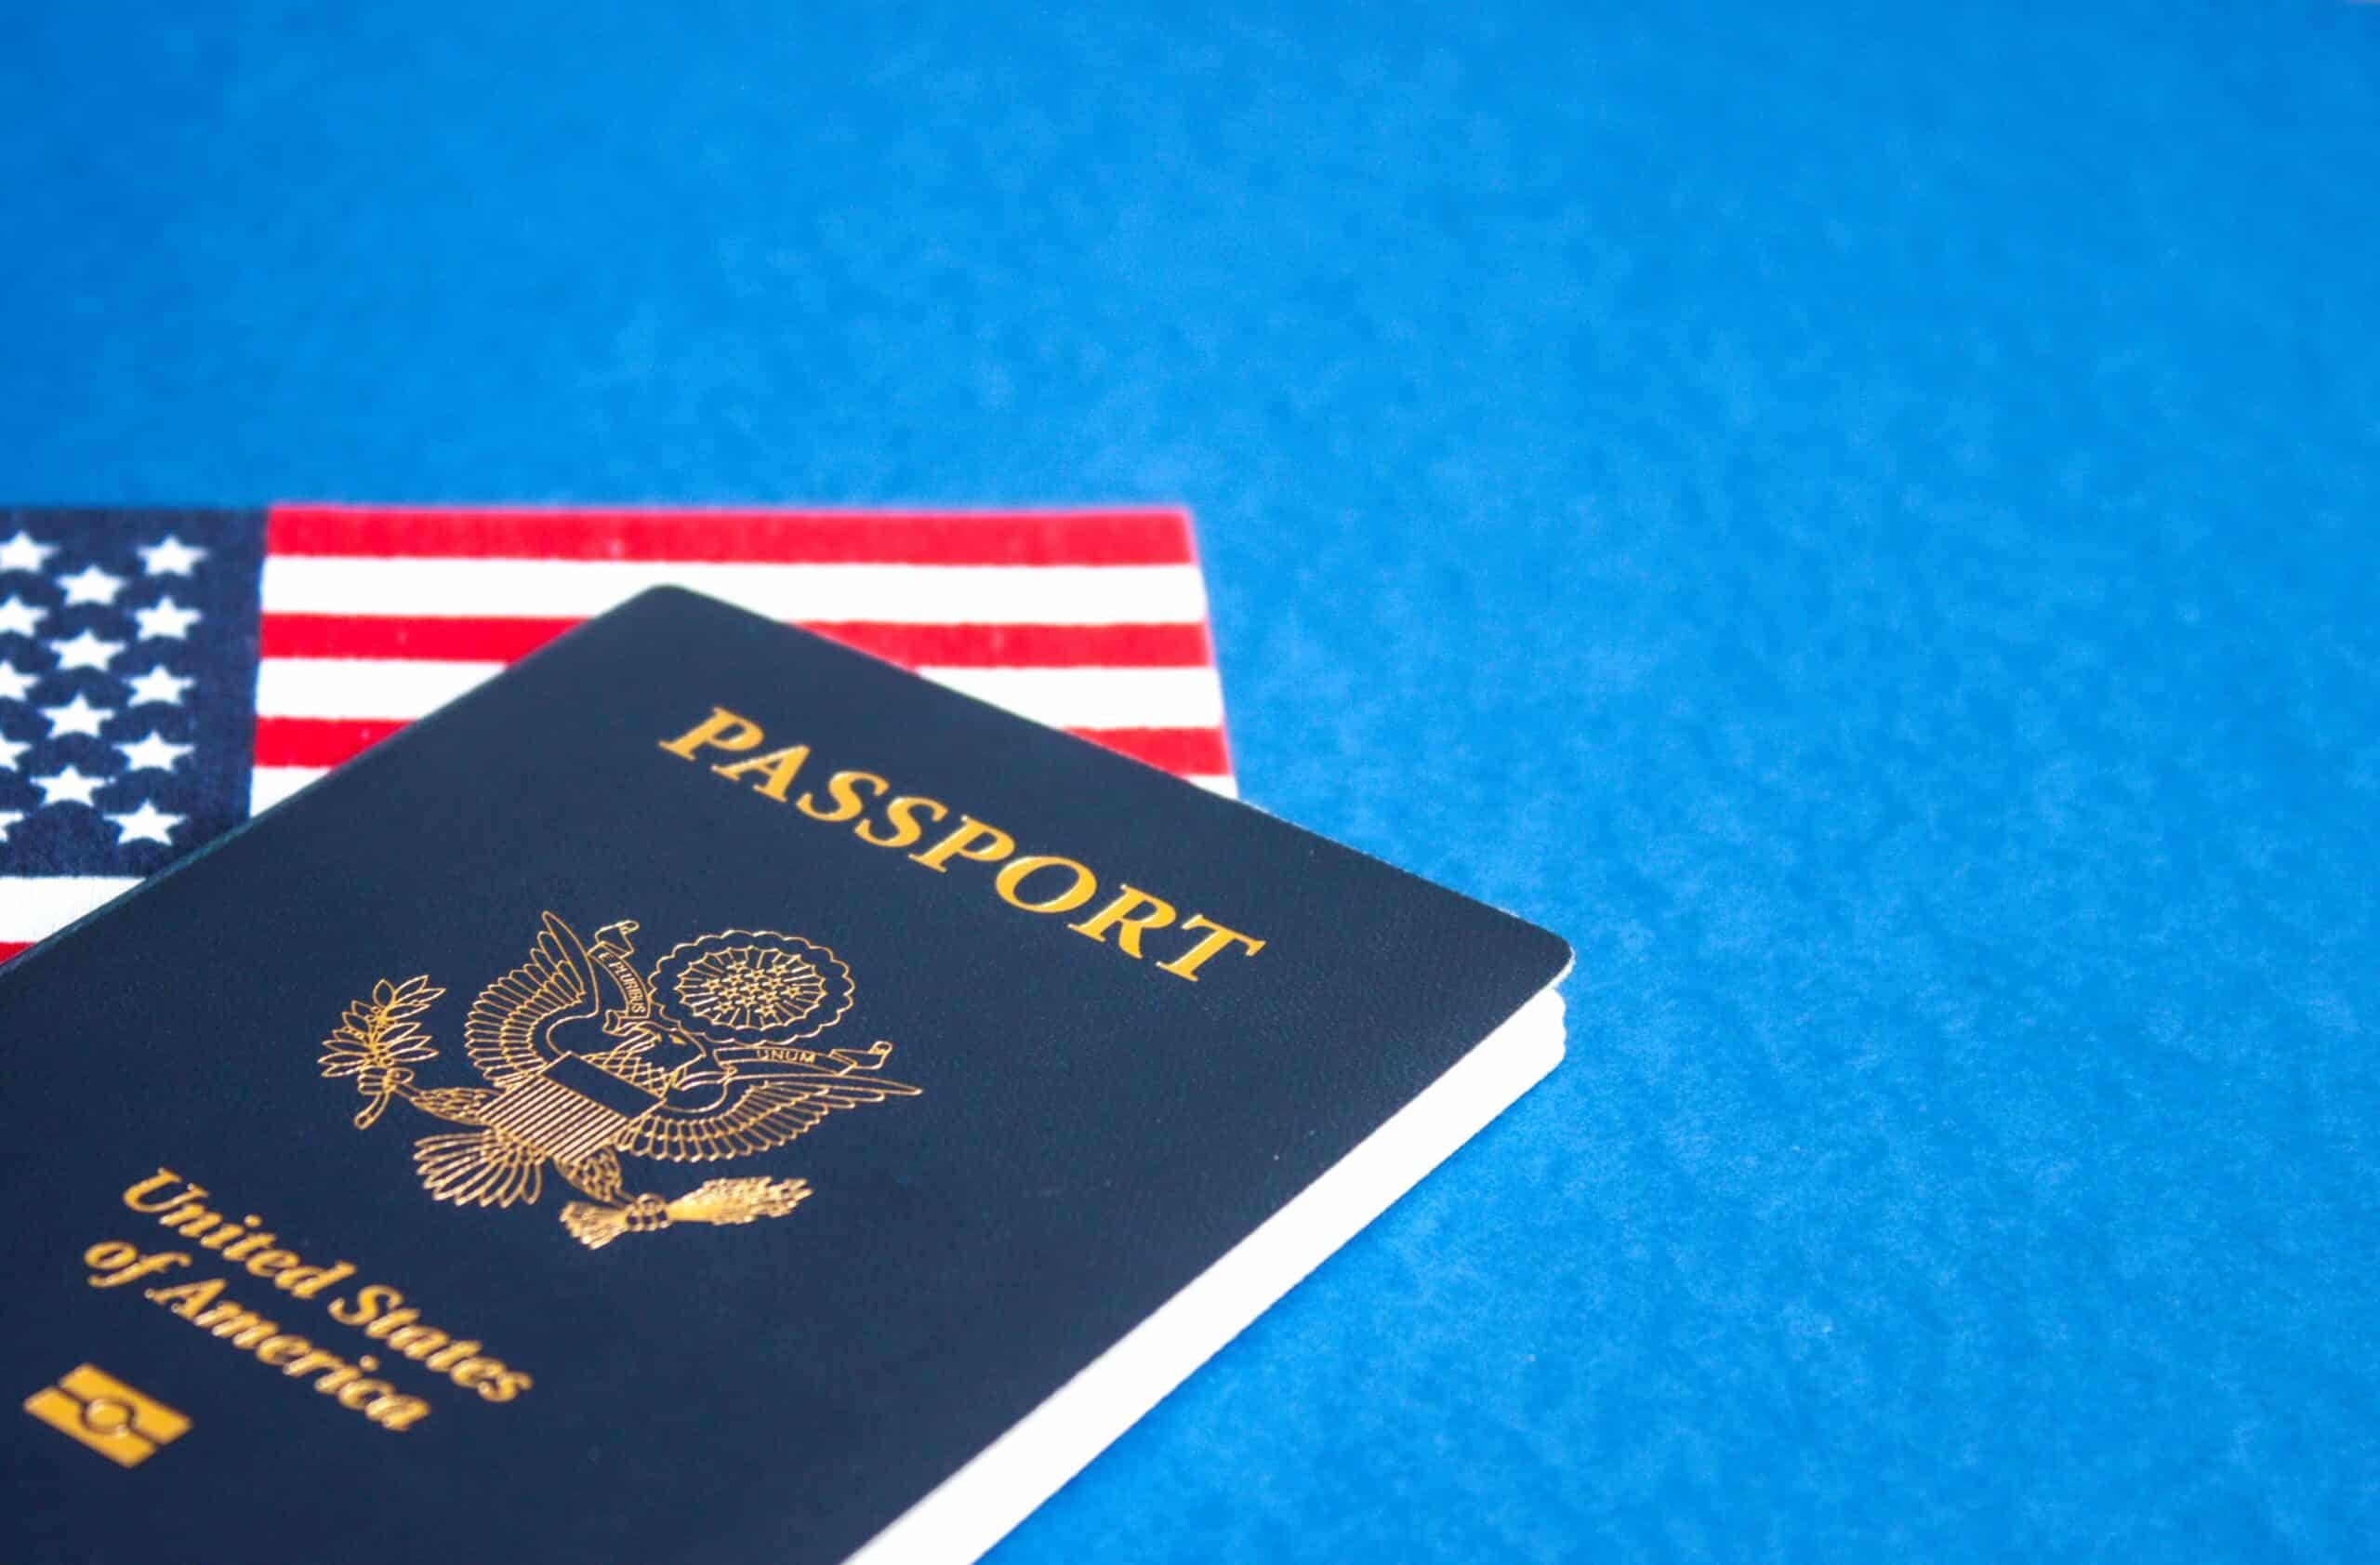 United States passport over an American flag.